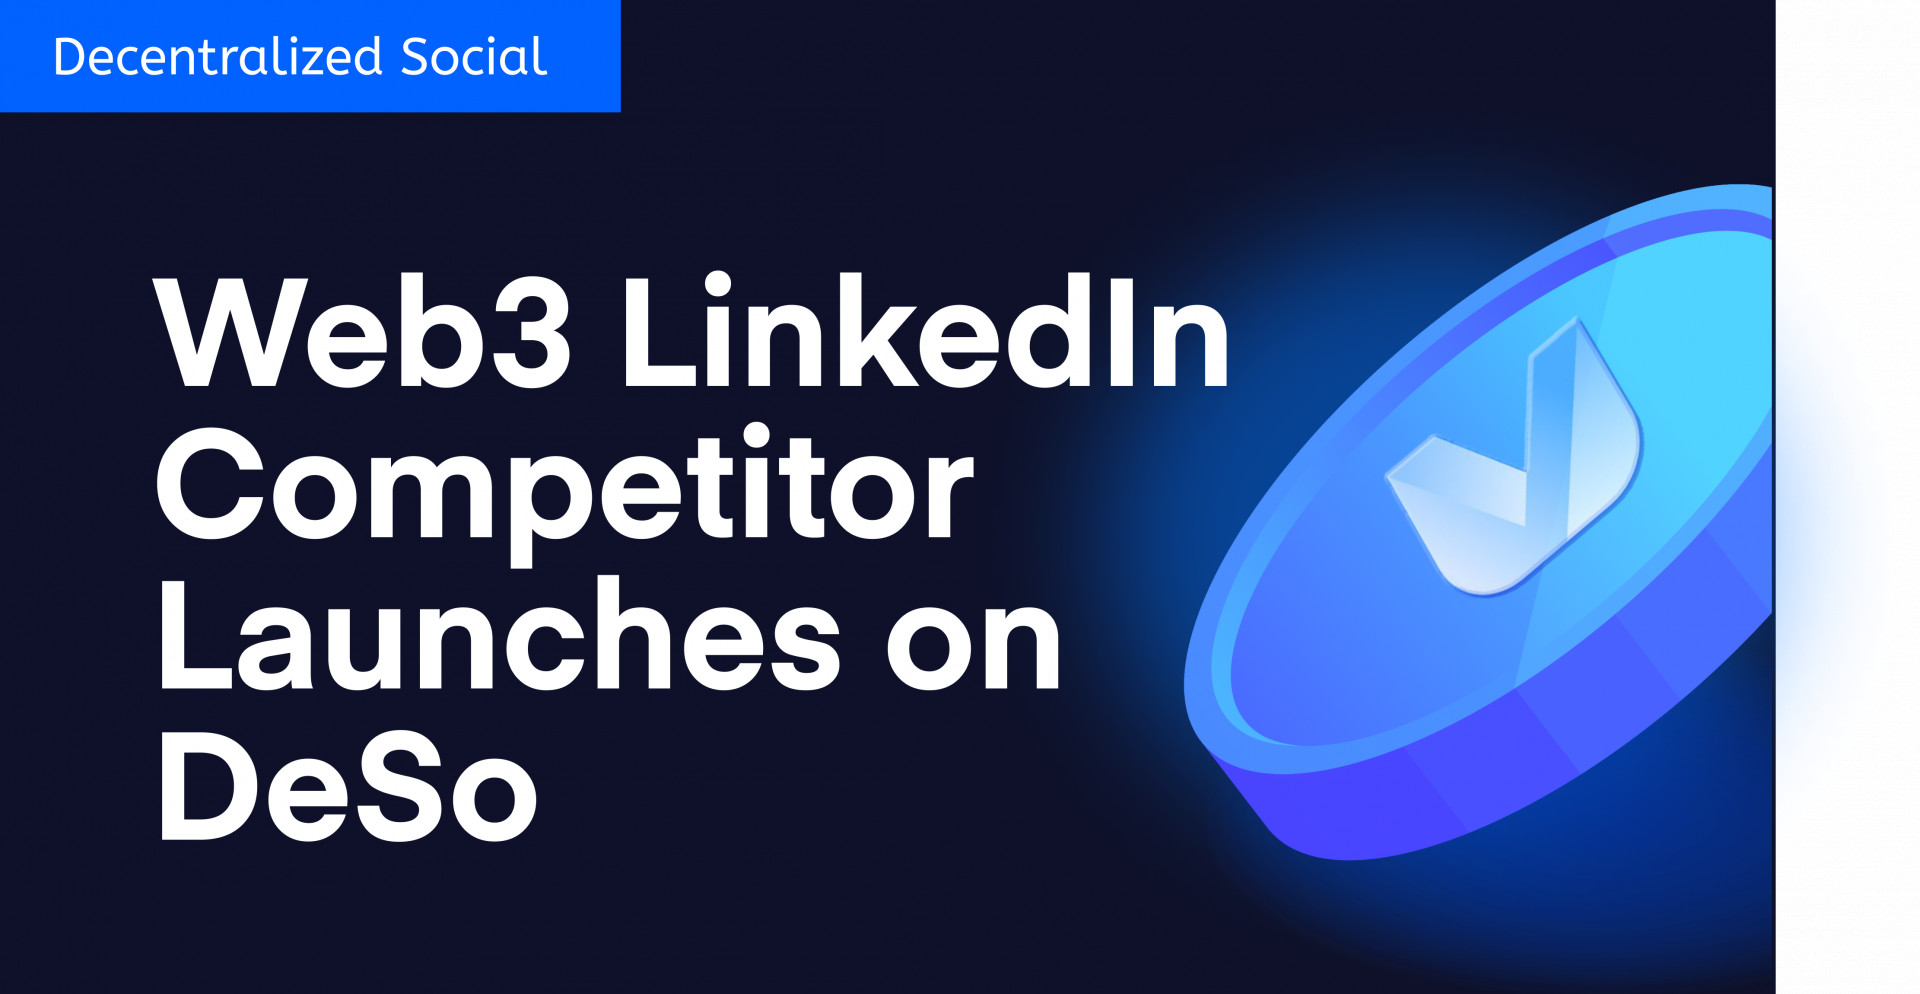 Decentralized Web 3.0 LinkedIn Competitor Launches on DeSo